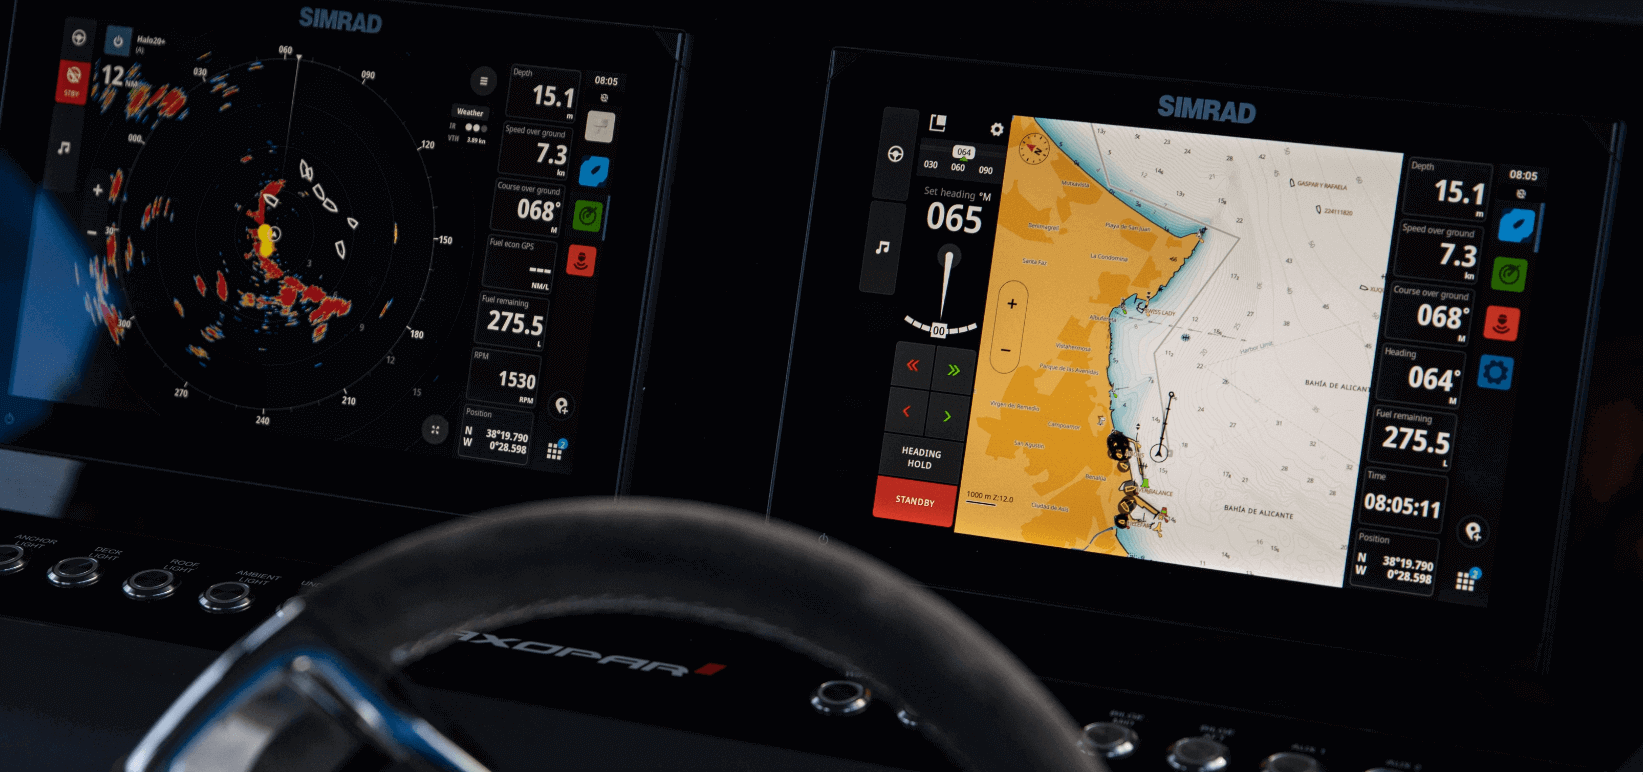 Look No Further: The Next Gen of Fish Finder Has Landed